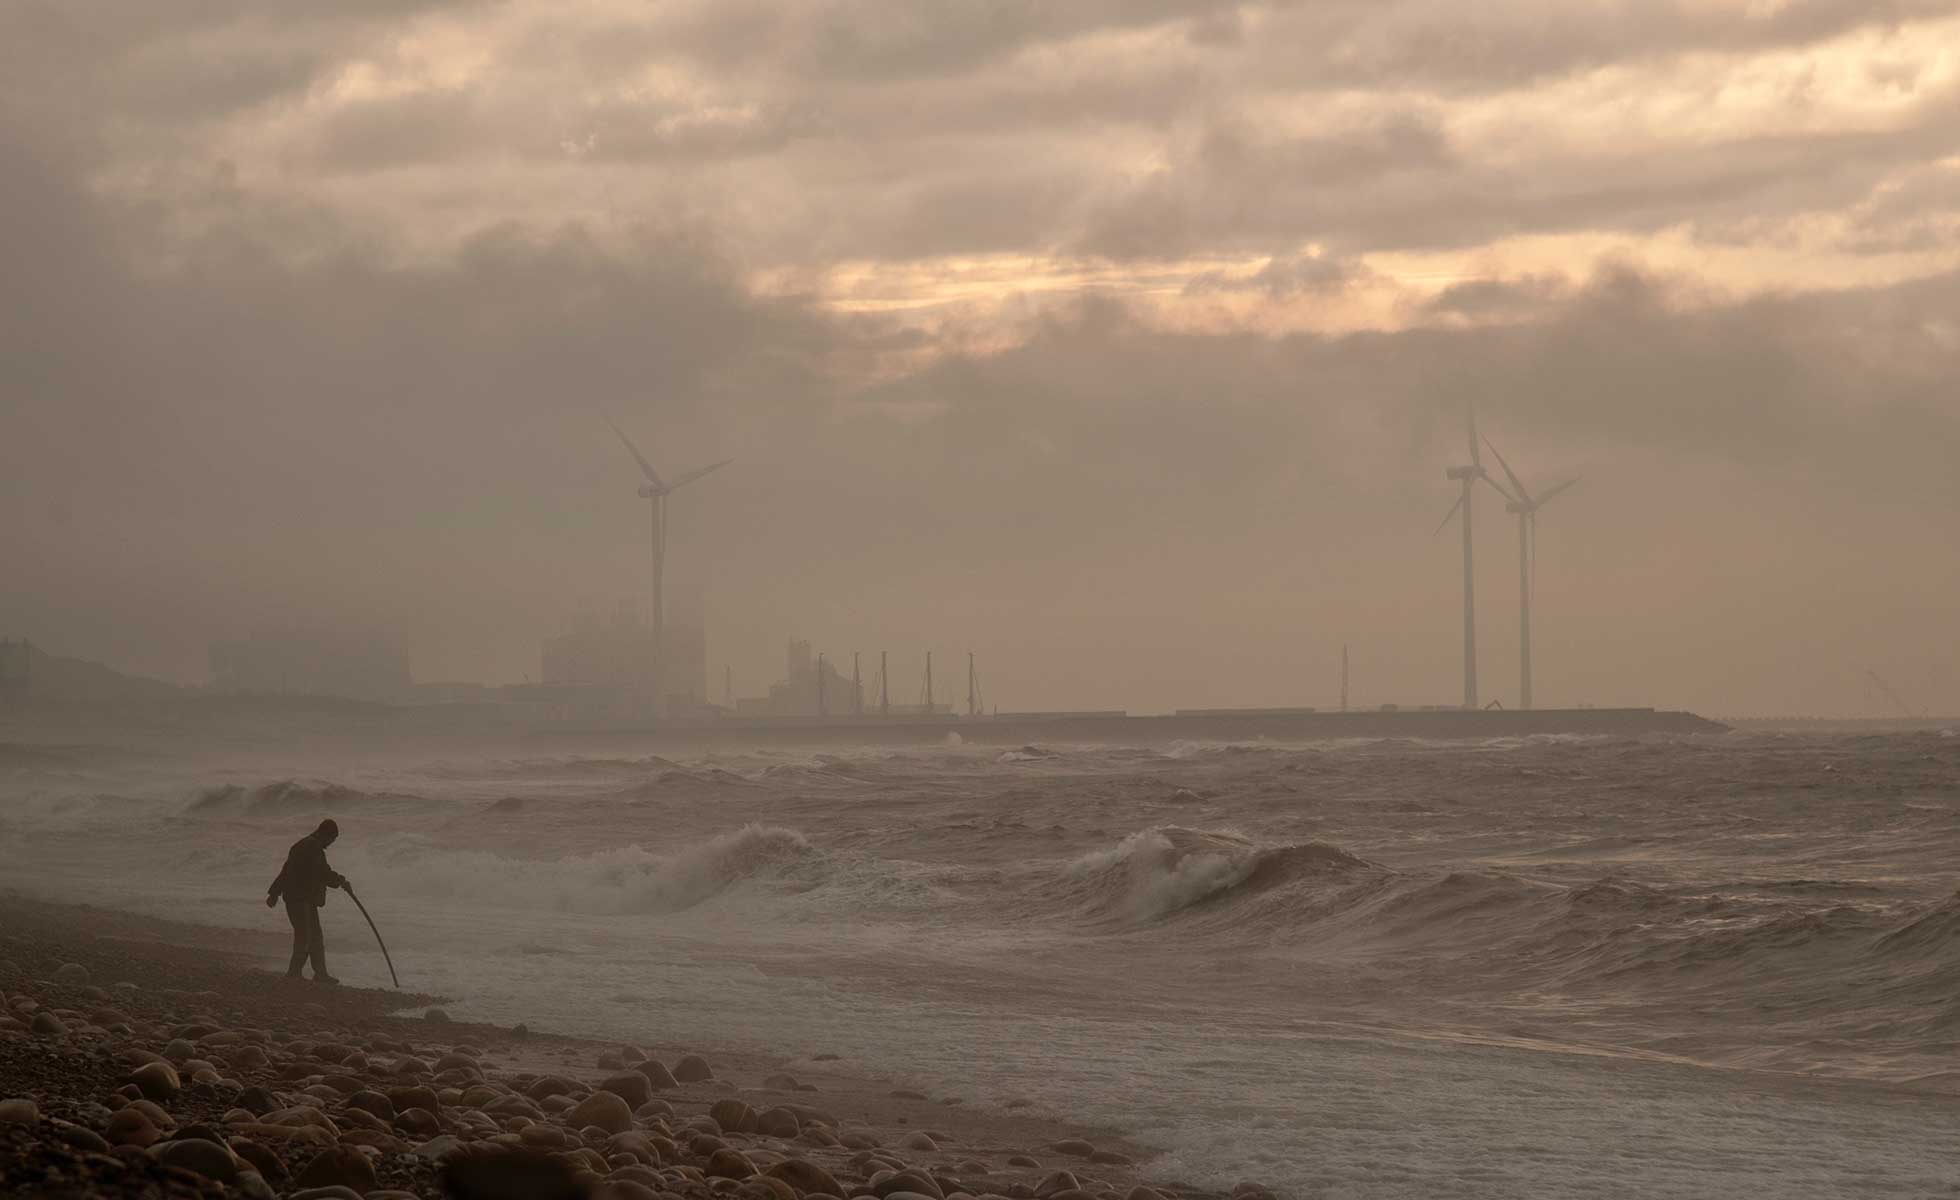 A man at the shore stands in a storm with wind turbines behind him